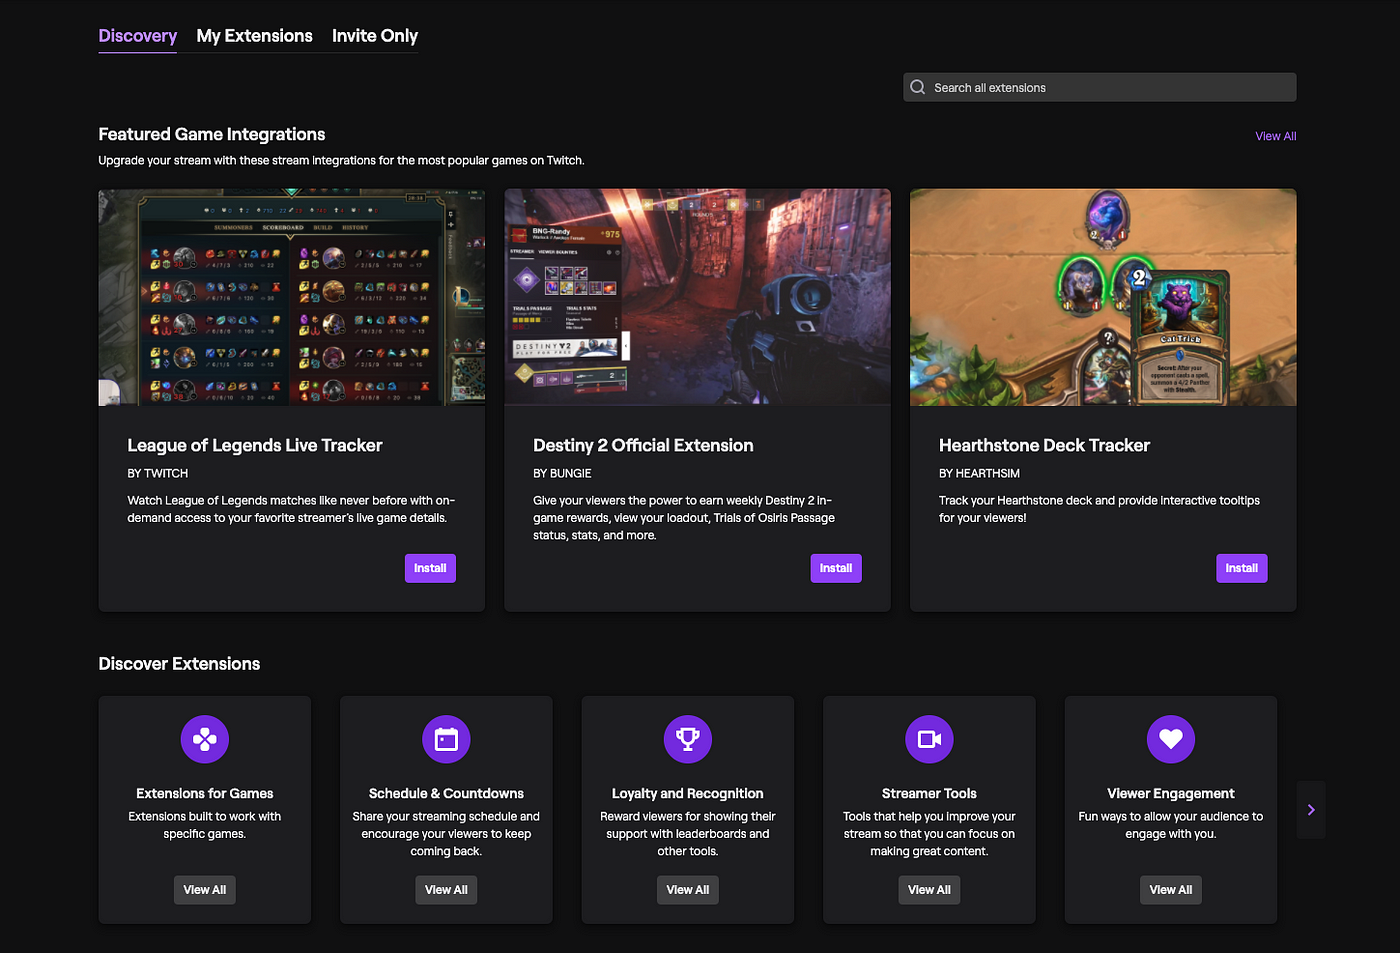 Starting Guide To Build A Twitch Extension By Julien Garrigues Creative By Black Pug Studio Medium